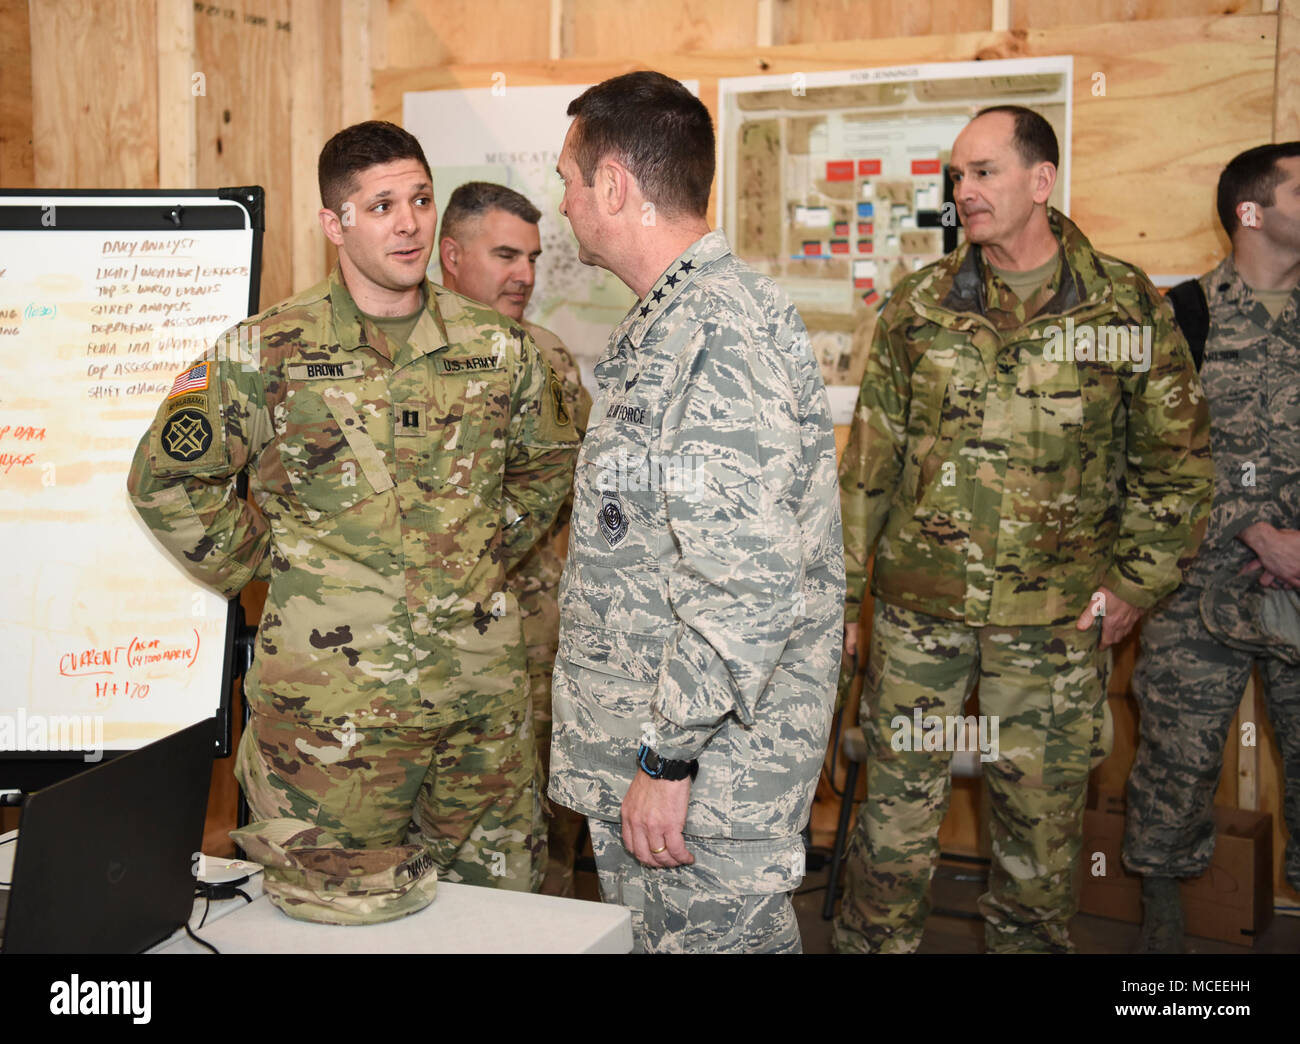 Air Force Gen. Joseph Lengyel, chief of National Guard Bureau, visits with Soldiers who are a part of exercise Guardian Response 2018 at Jennings County Fair Grounds, North Vernon, Indiana, April 14, 2018. Lengyel toured the tactical operations center (TOC) to observe Task Force Ops manages command and control during a simulated demanding disaster environment. (U.S. Army National Guard photo by Spc. Chelsea Baker) Stock Photo